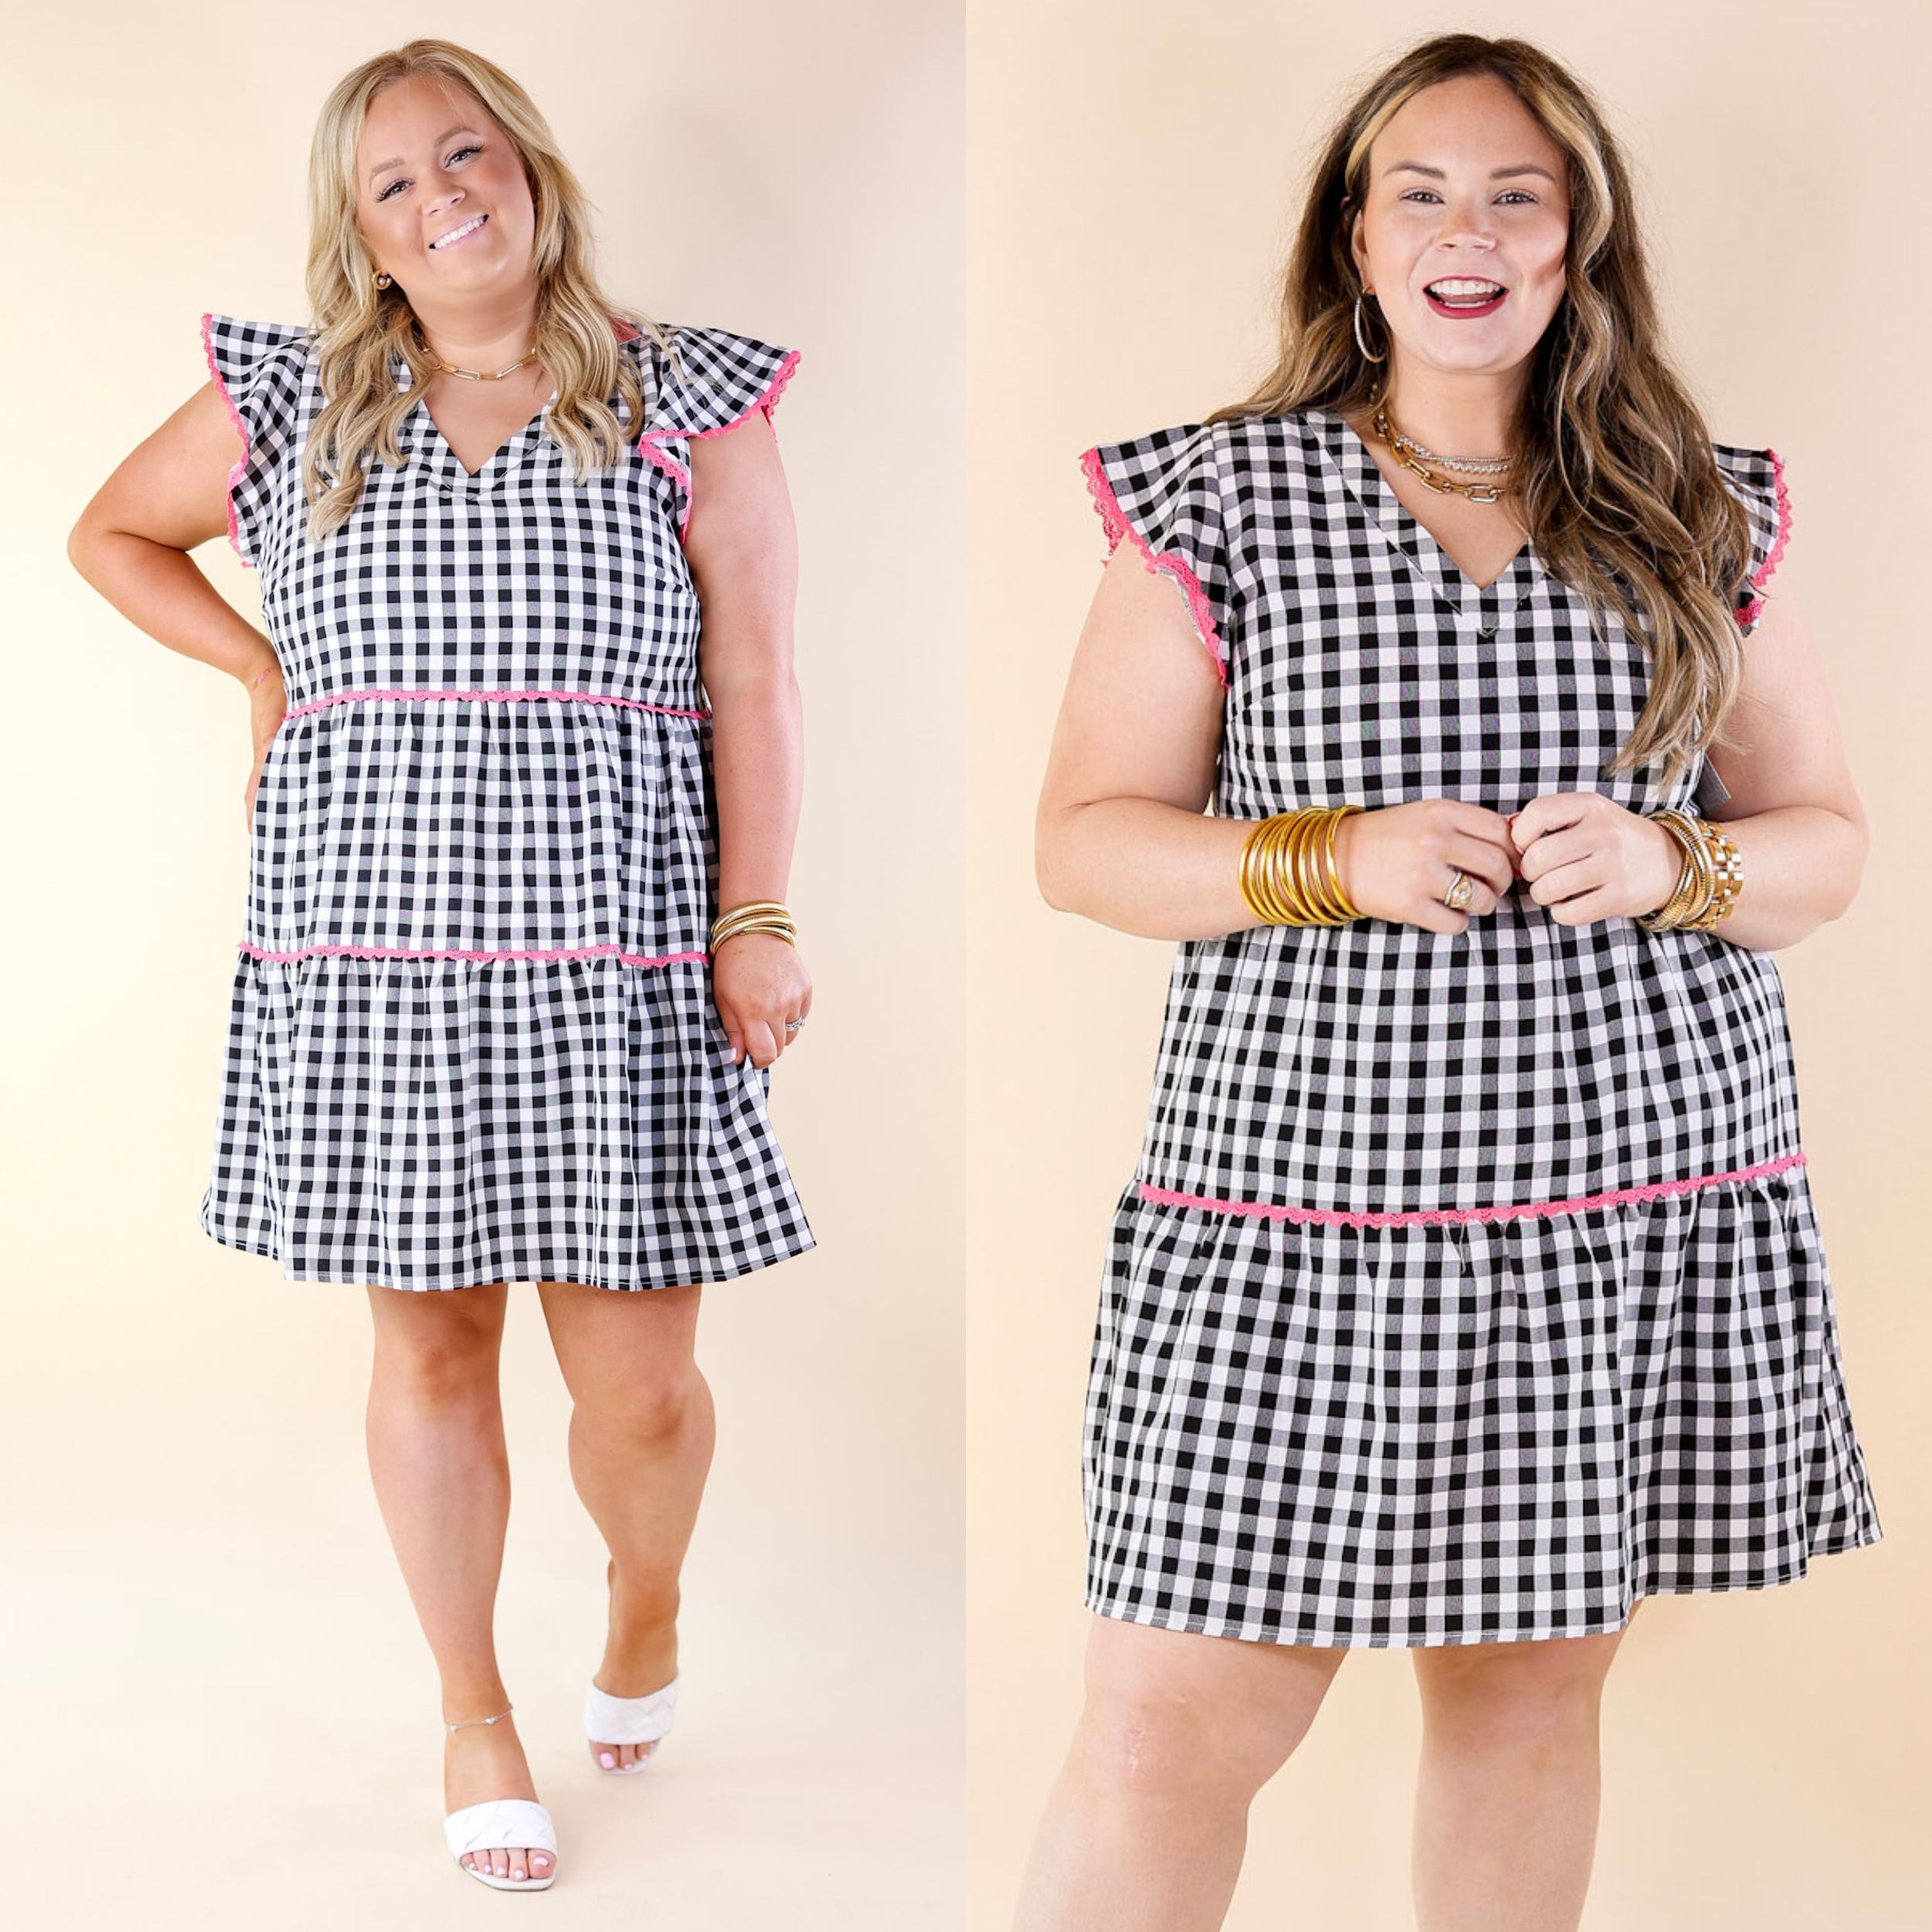 Flirty Mood Gingham Ruffle Tiered Dress with Pink Lace Trim - Giddy Up Glamour Boutique